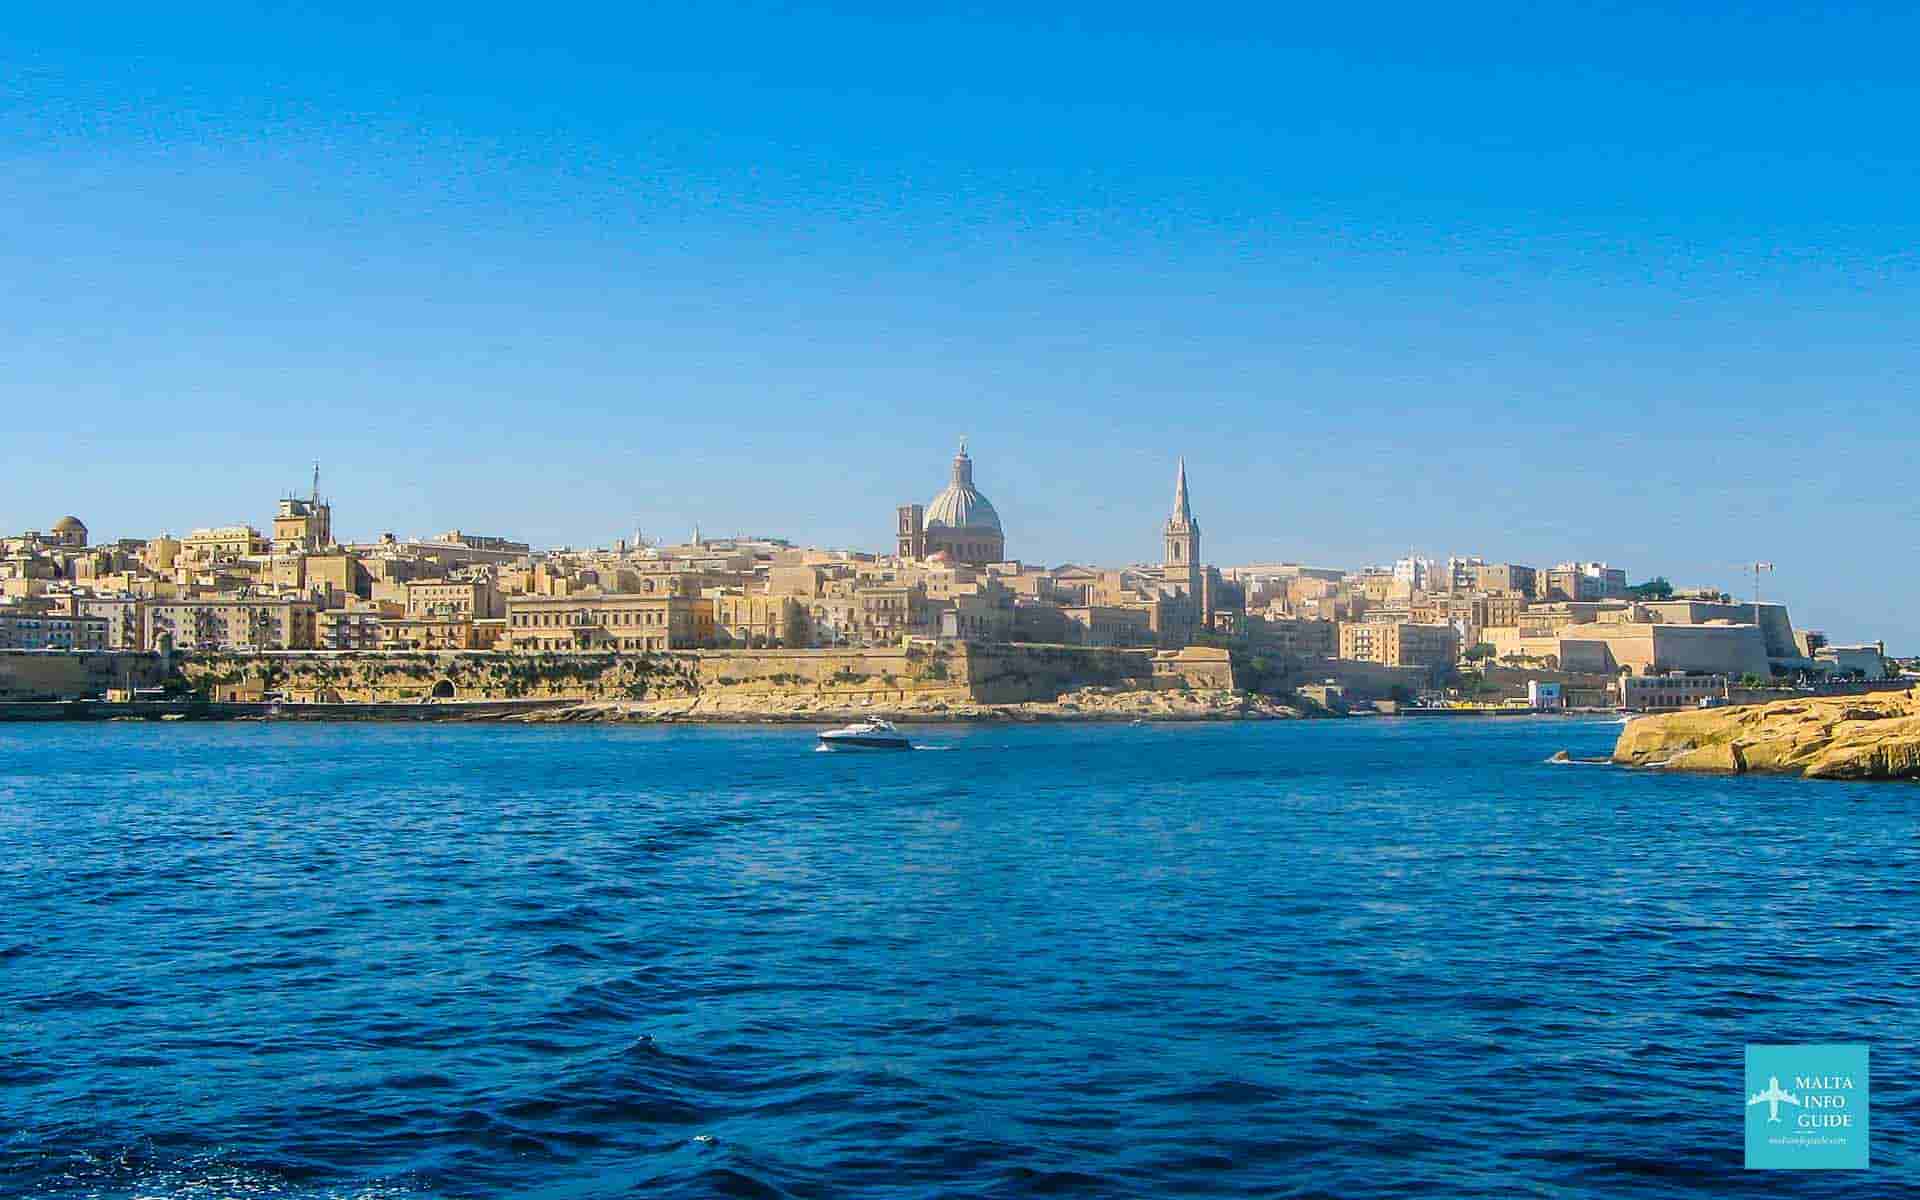 A view of Valletta from the cruise boat on the way to Comino island.